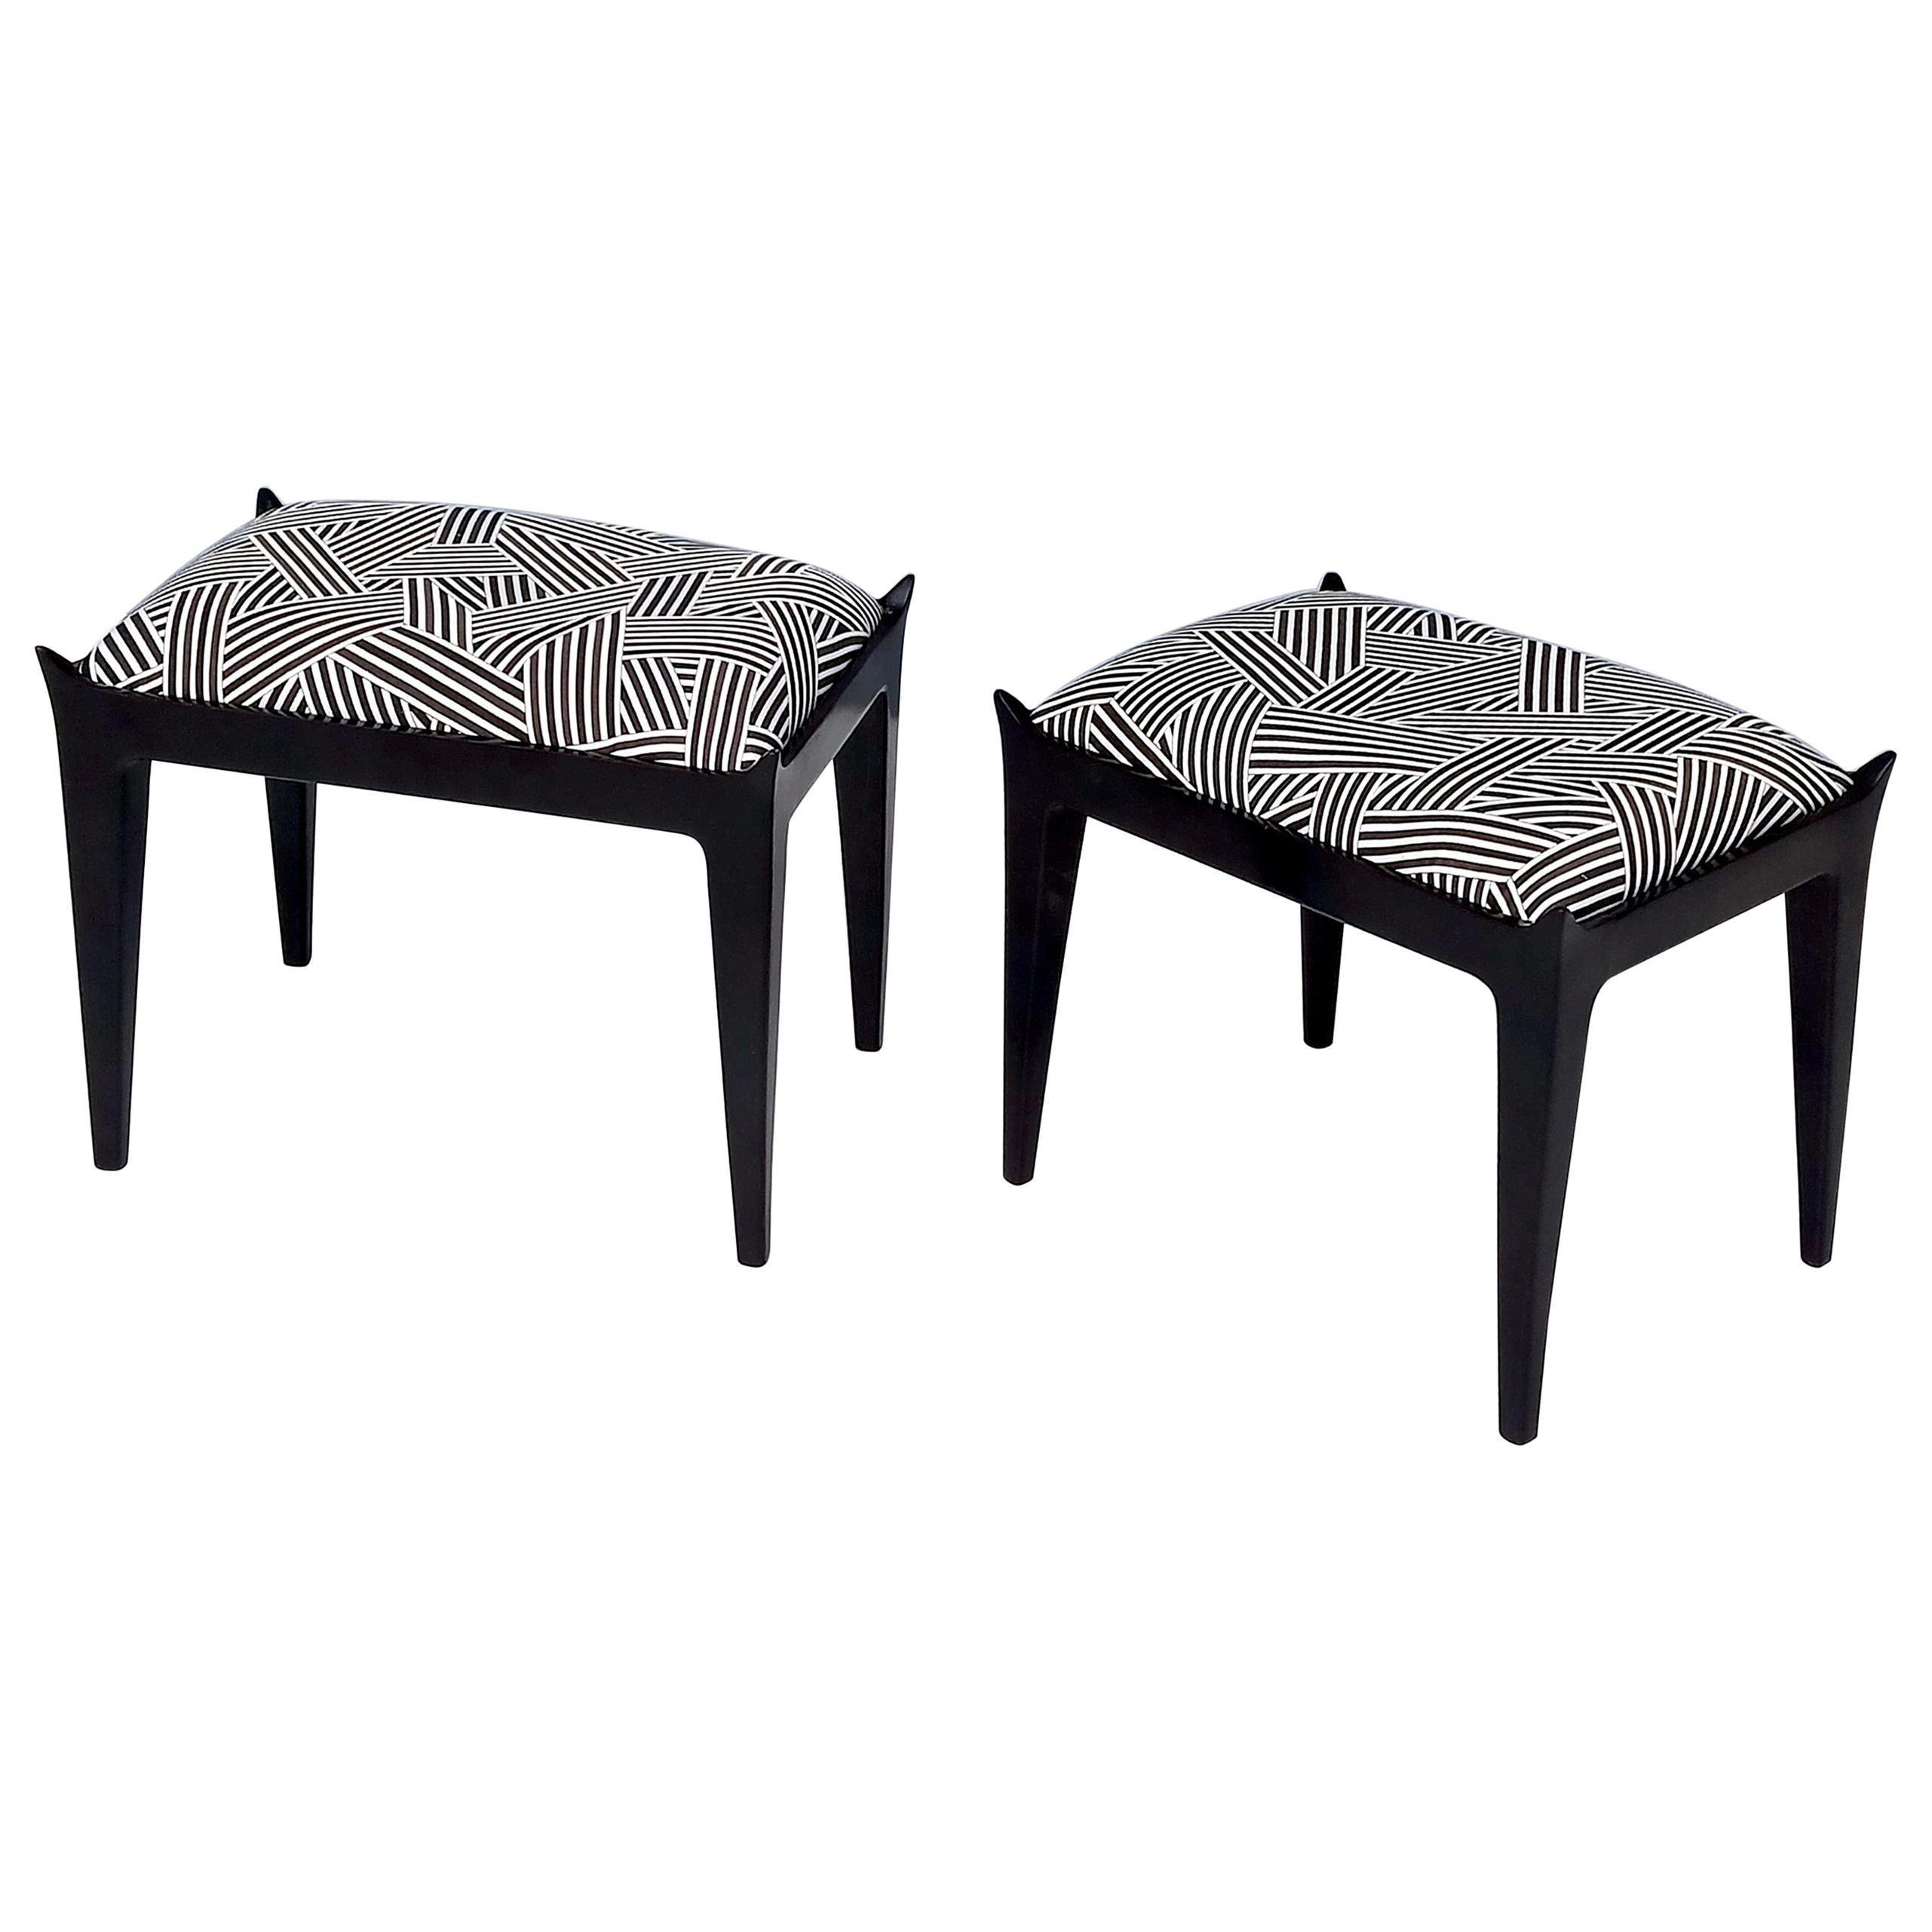 Pair of Vintage Poufs Upholstered in Black and White Fabric by Dedar